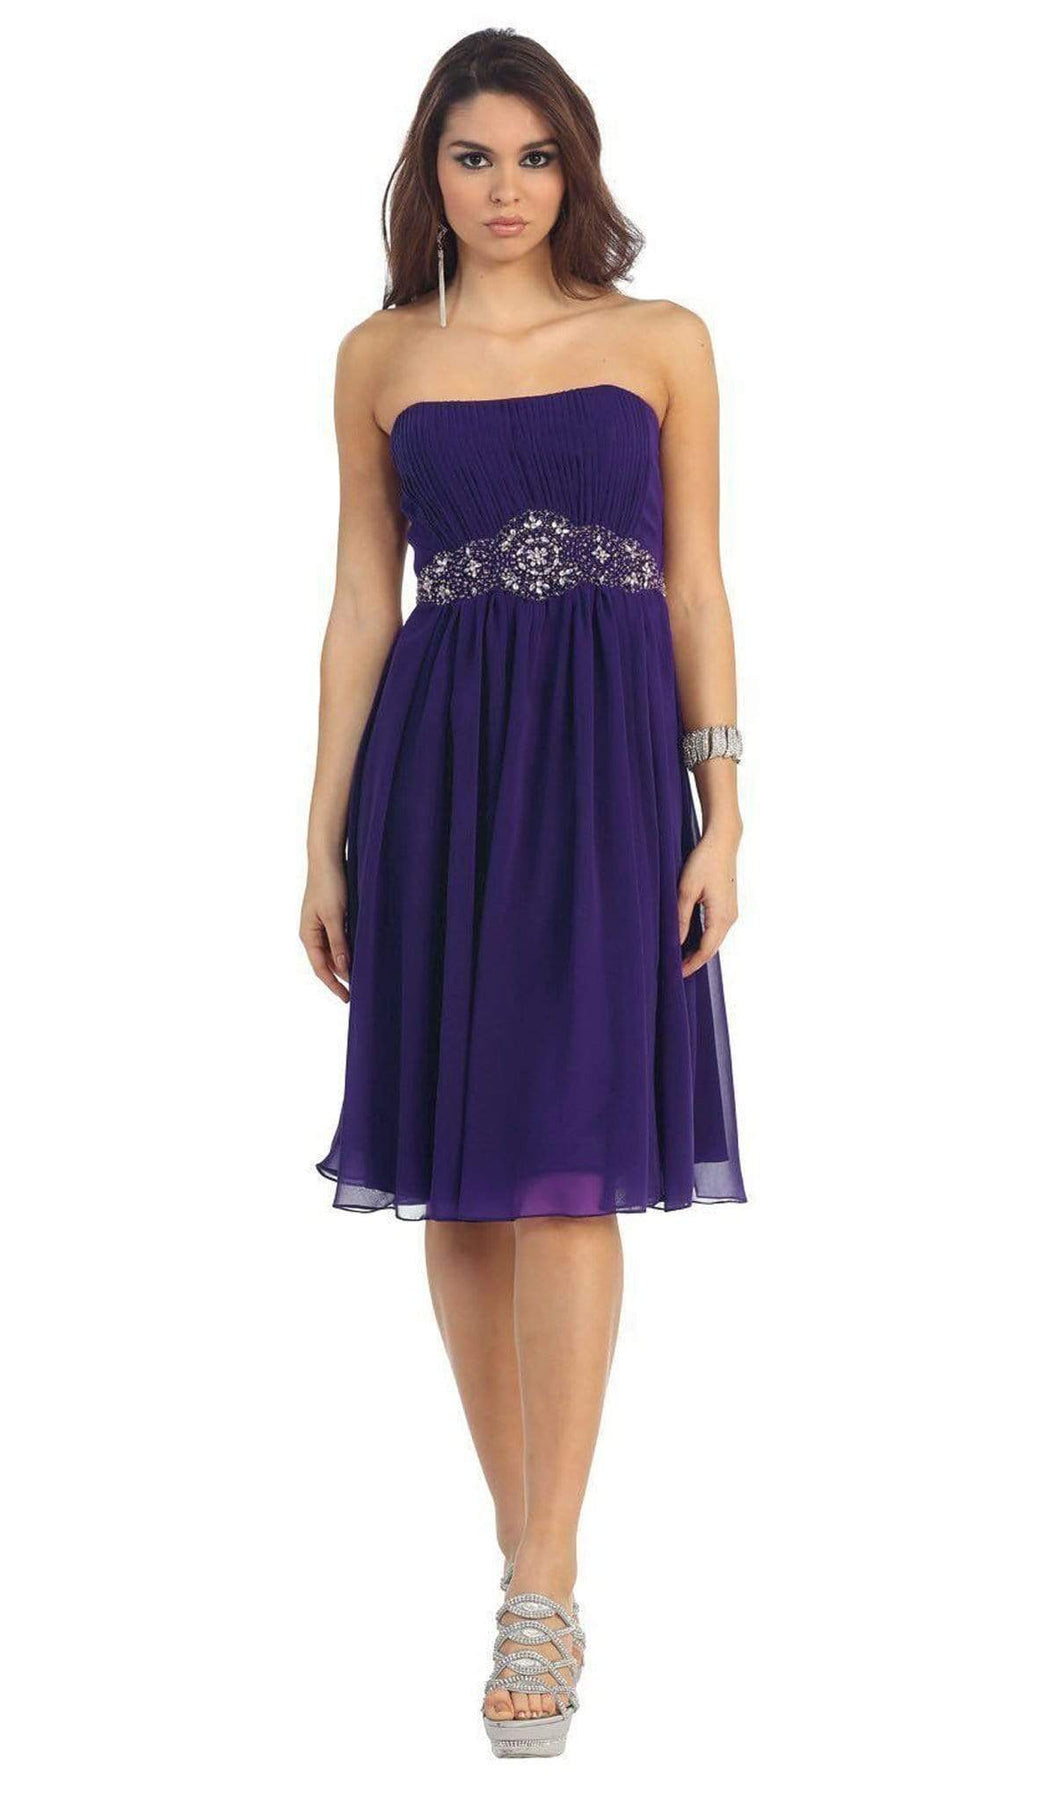 May Queen - MQ711B Pleated Sweetheart Bejeweled Waist Cocktail Dress Special Occasion Dress 22 / Eggplant